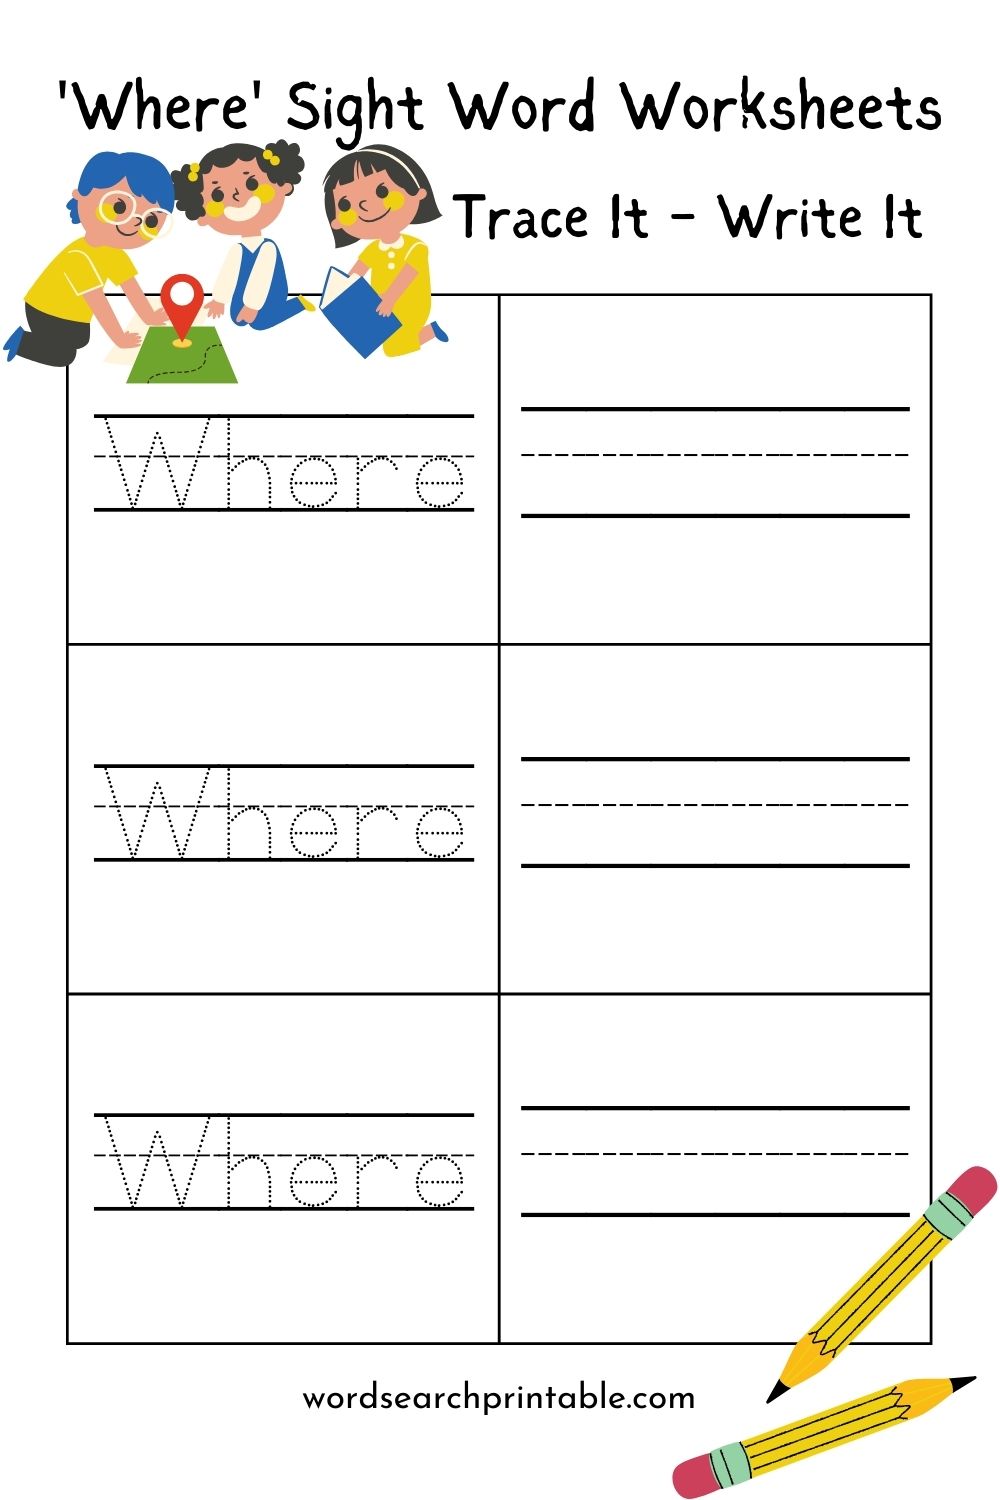 Where Trace It Worksheet - Tracing and Writing